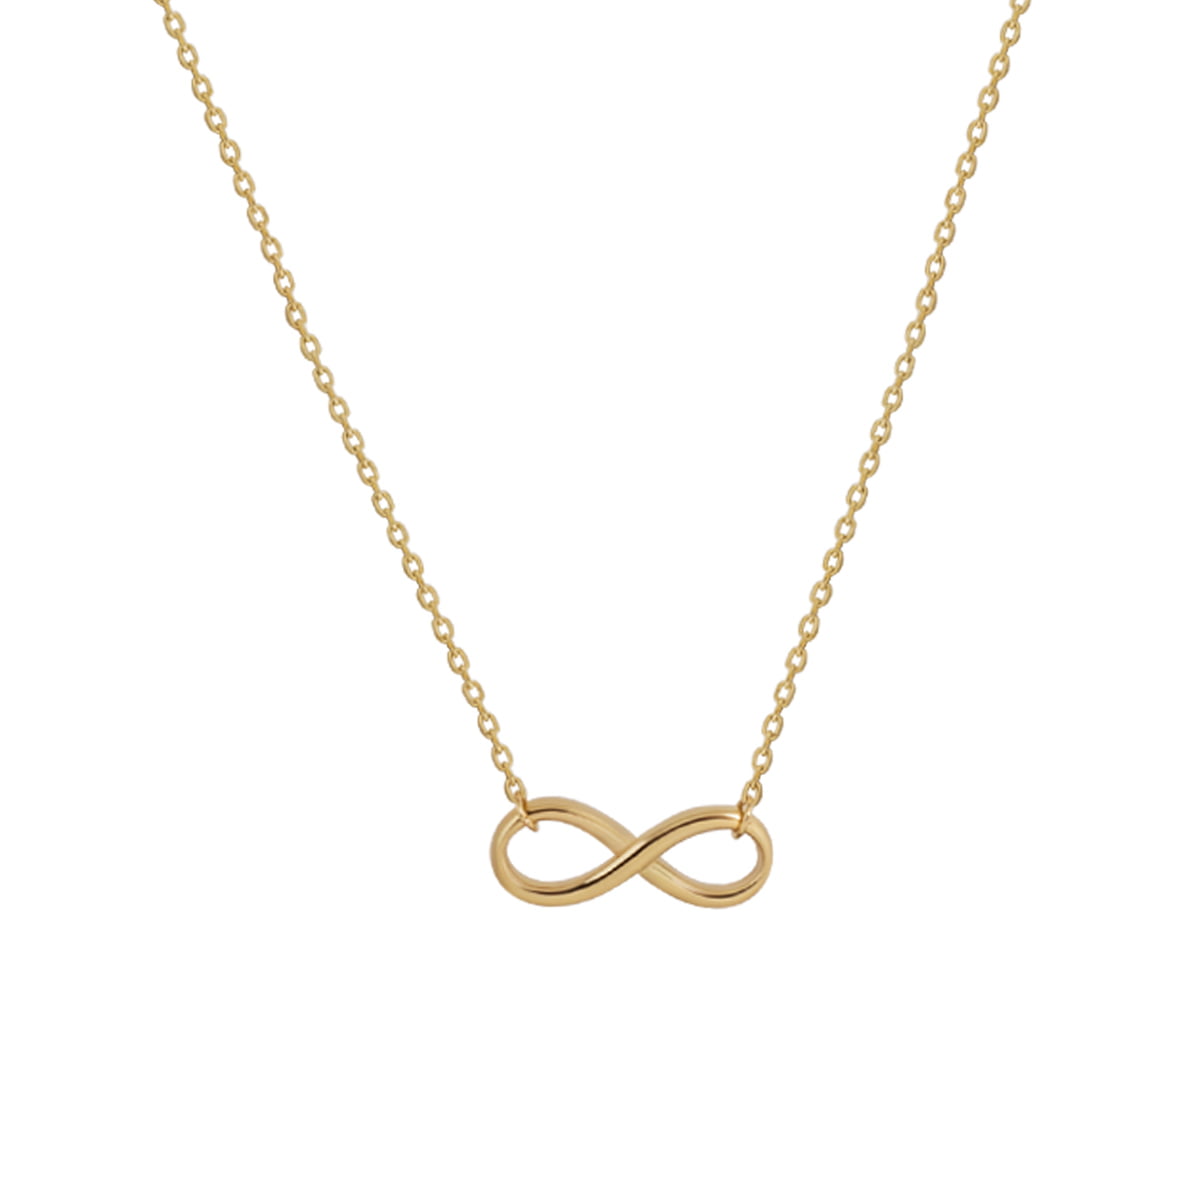 18ct Yellow Gold Infinity Pendant Necklace